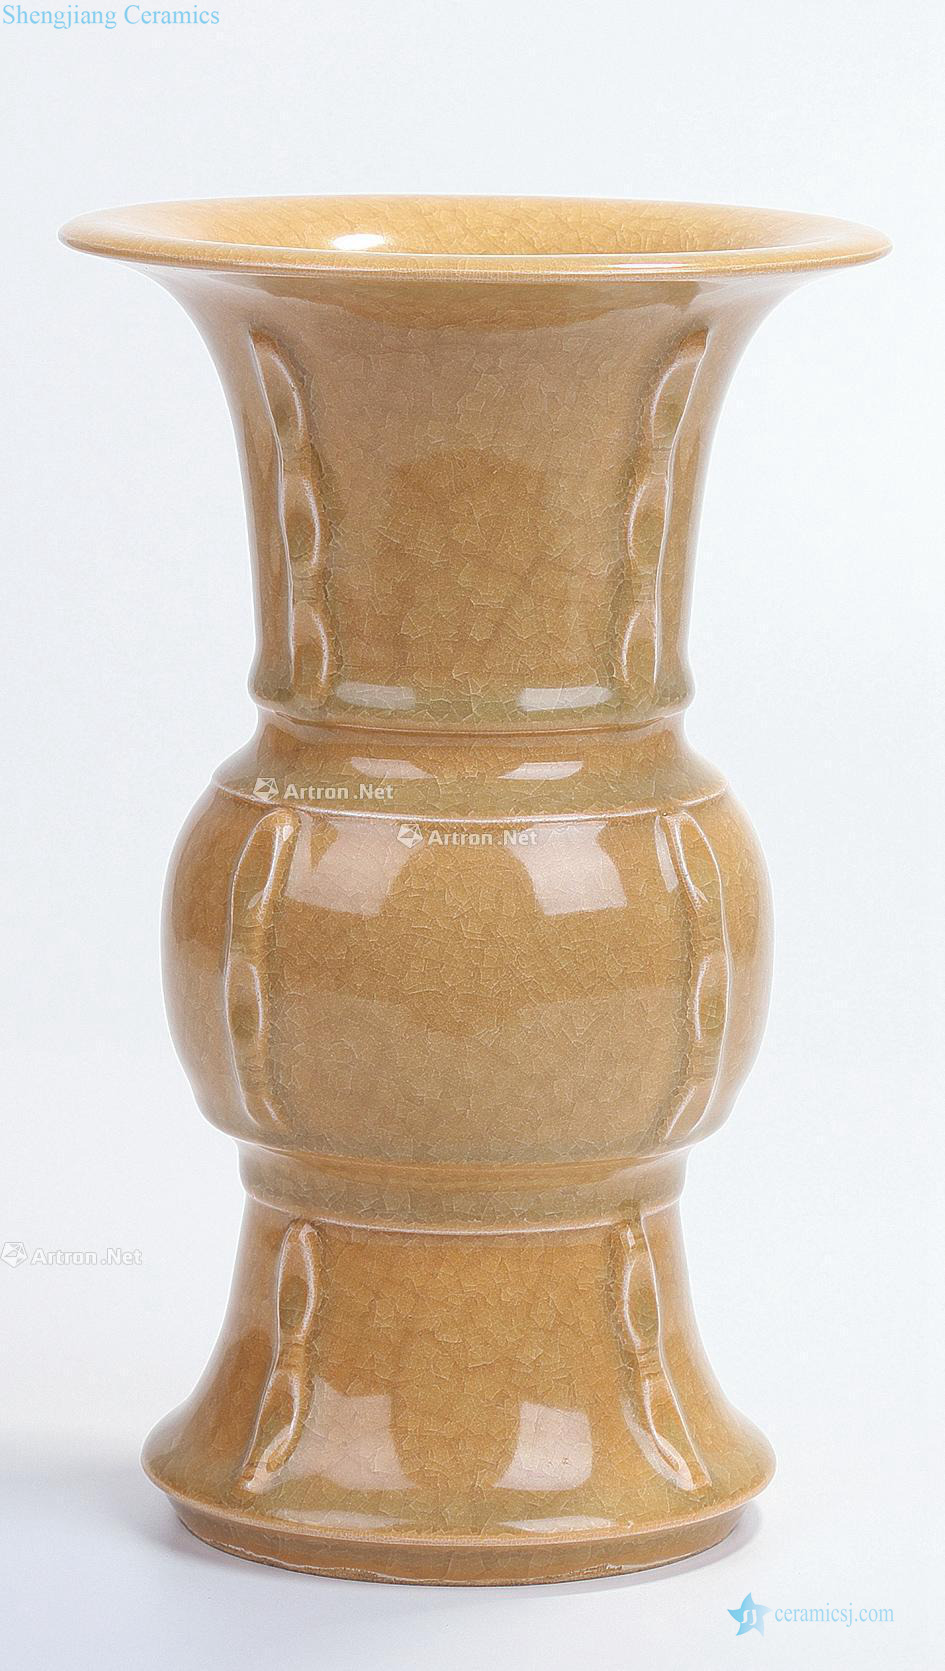 The song dynasty Longquan celadon yellow glaze vase with flowers